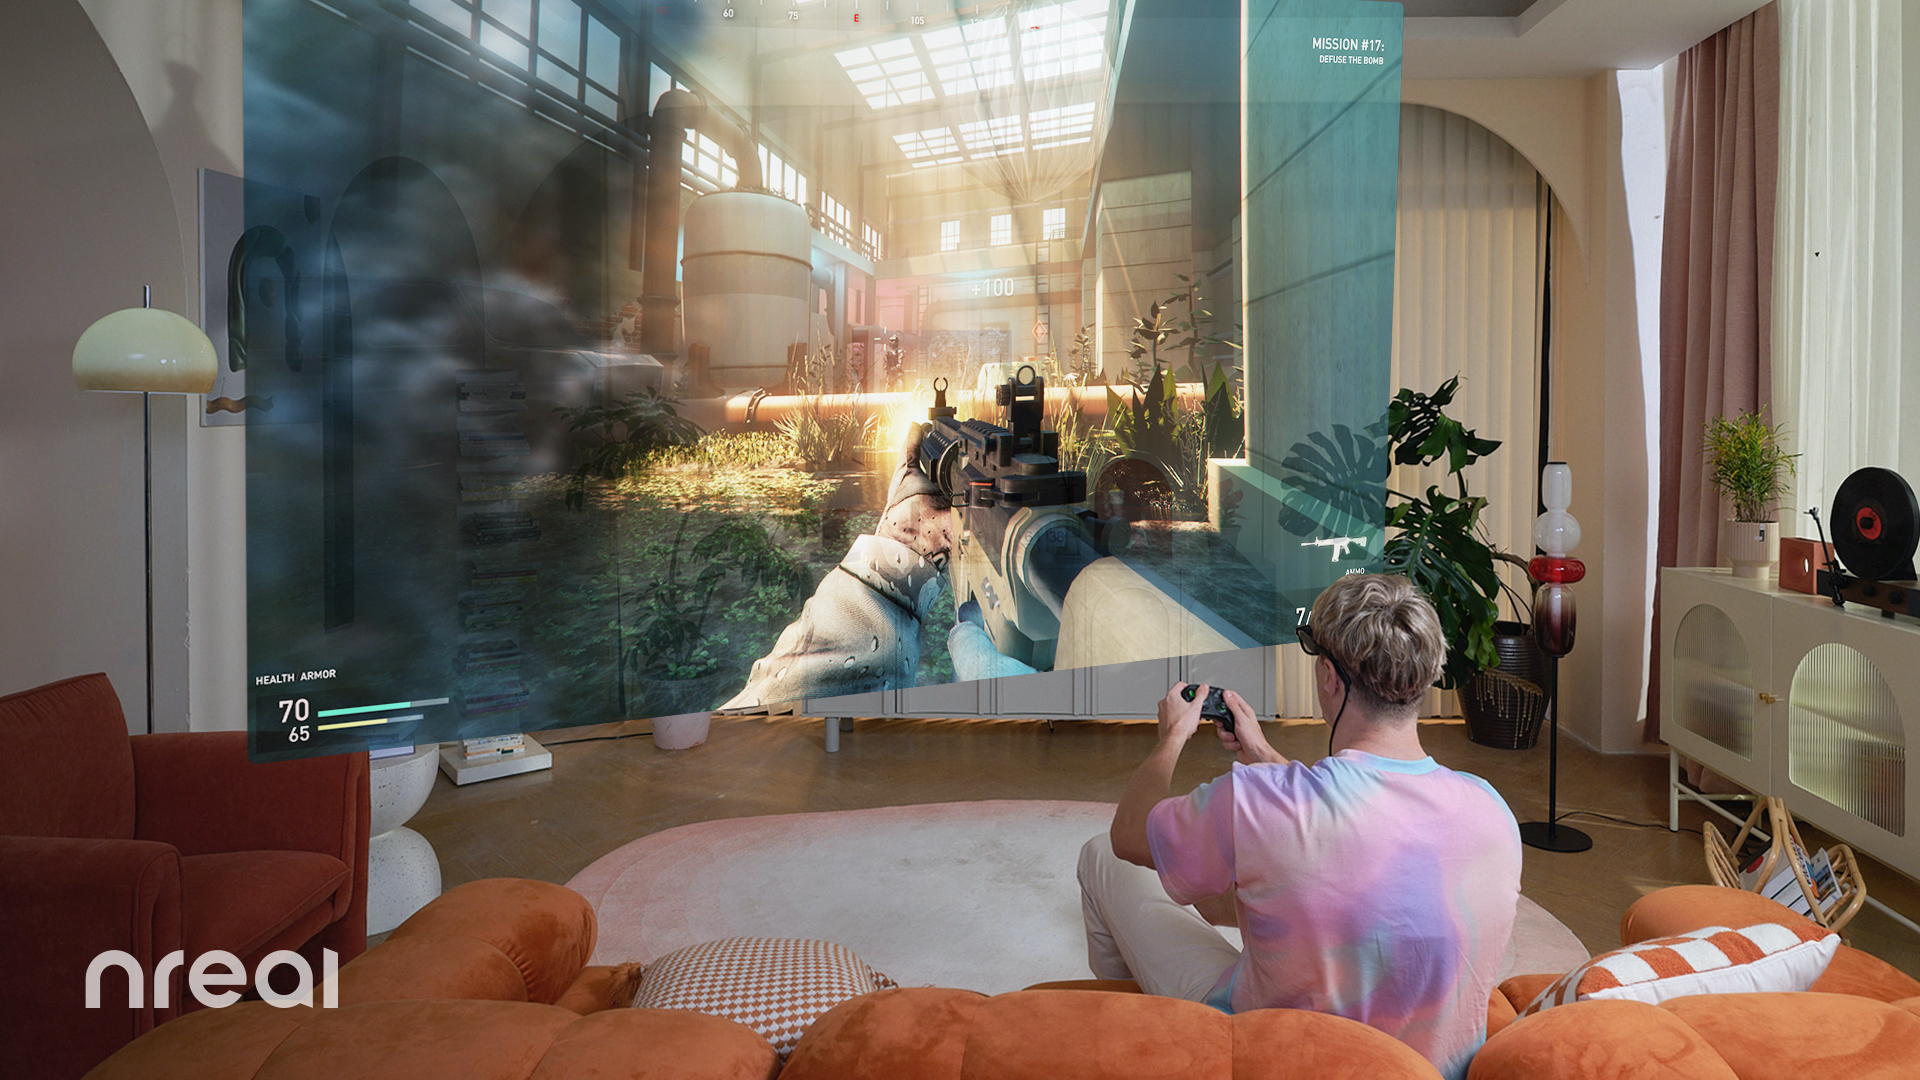 The Nreal Air AR glasses being used to see a video game screen while some holds a controller in their living room, they're sat on the couch with pillows all around them